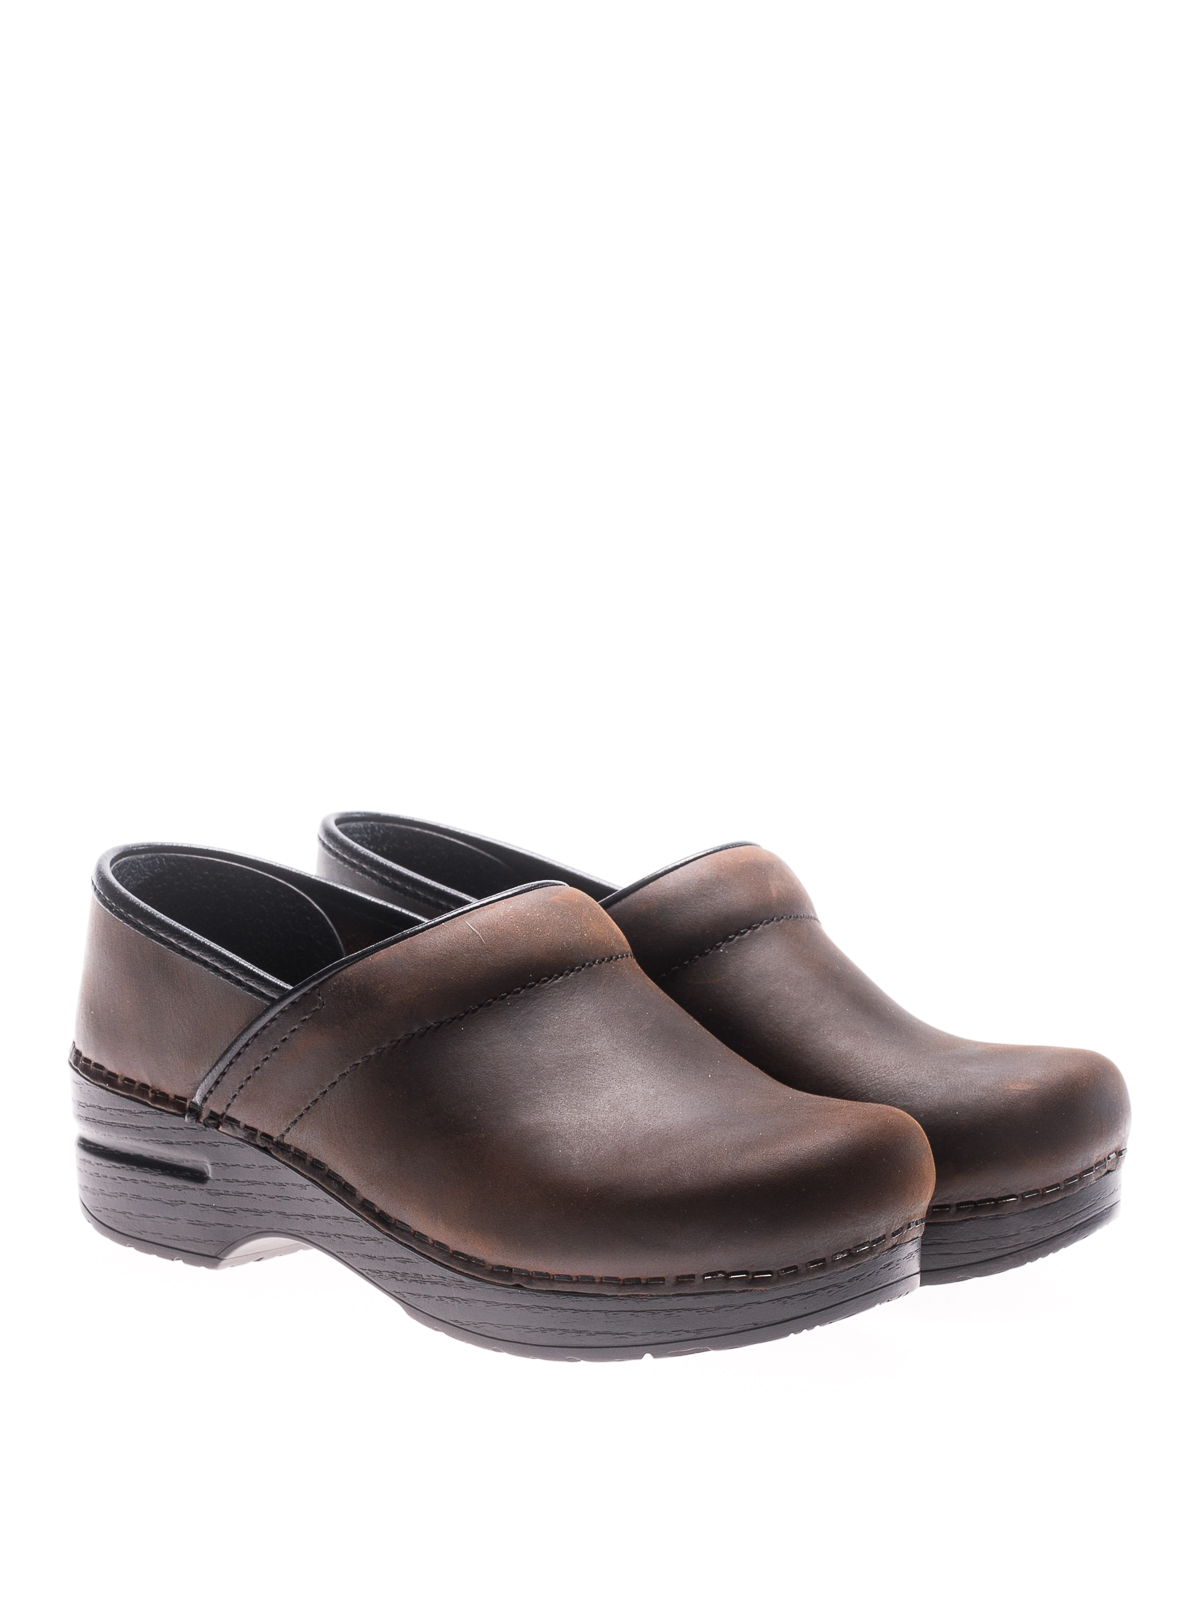 brown leather clogs - mules shoes 